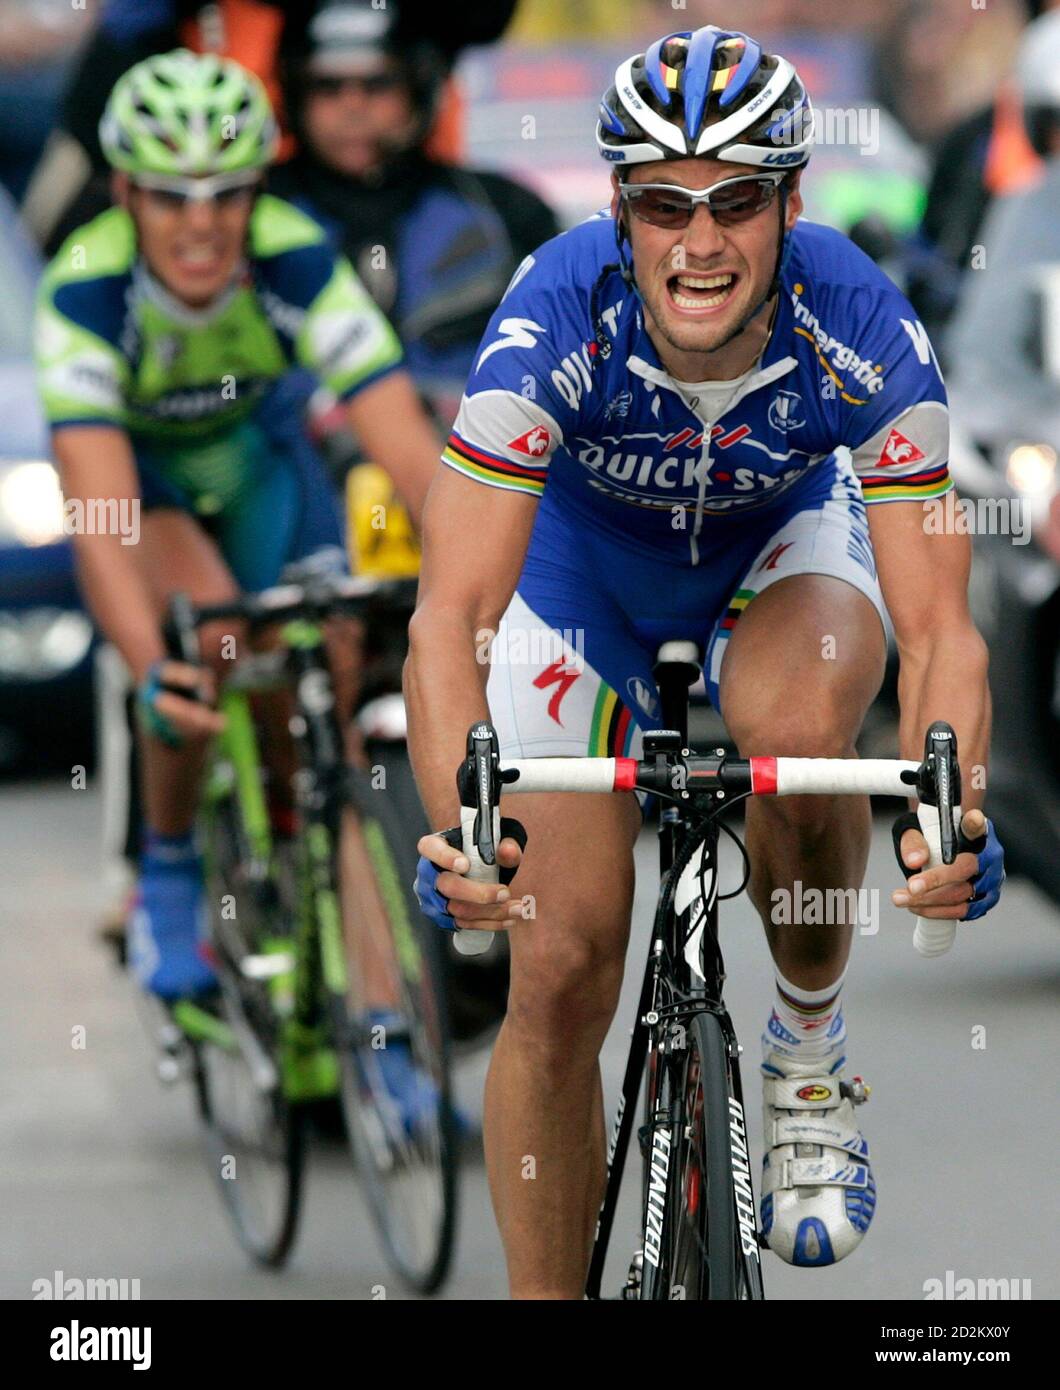 Tom Boonen of Belgium wins the E3 Prijs cycling race in Harelbeke, March  31, 2007. Boonen, who won the race for the fourth time in a row, finished  the race ahead of